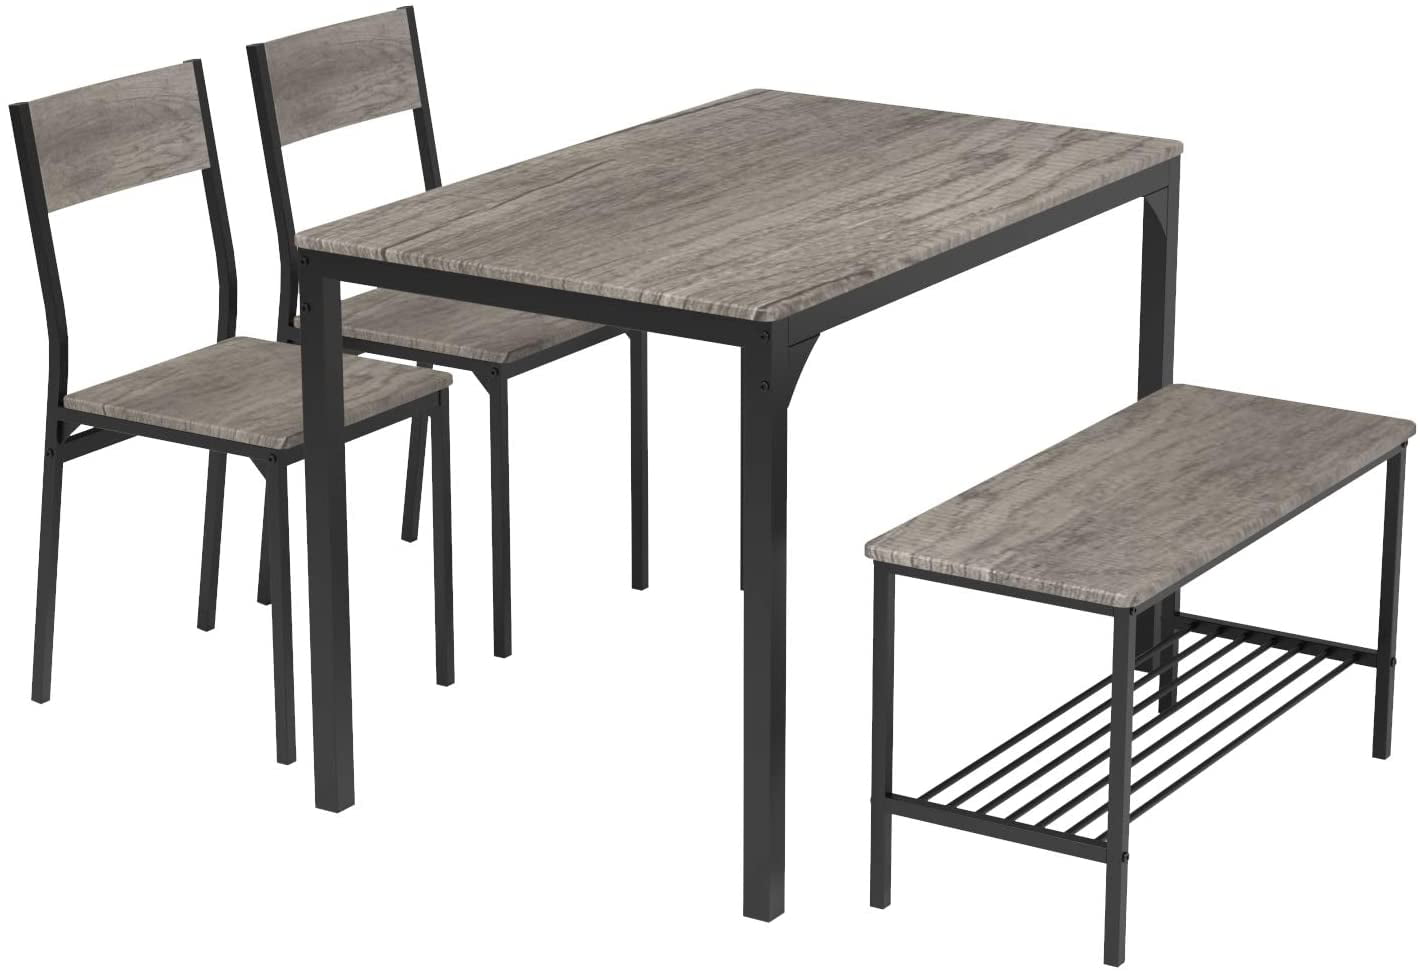 Soges 4 Pieces Wood Dining Table with Two Chairs and a Bench Sets,Dining Room Sets,GCCZ1008-CA